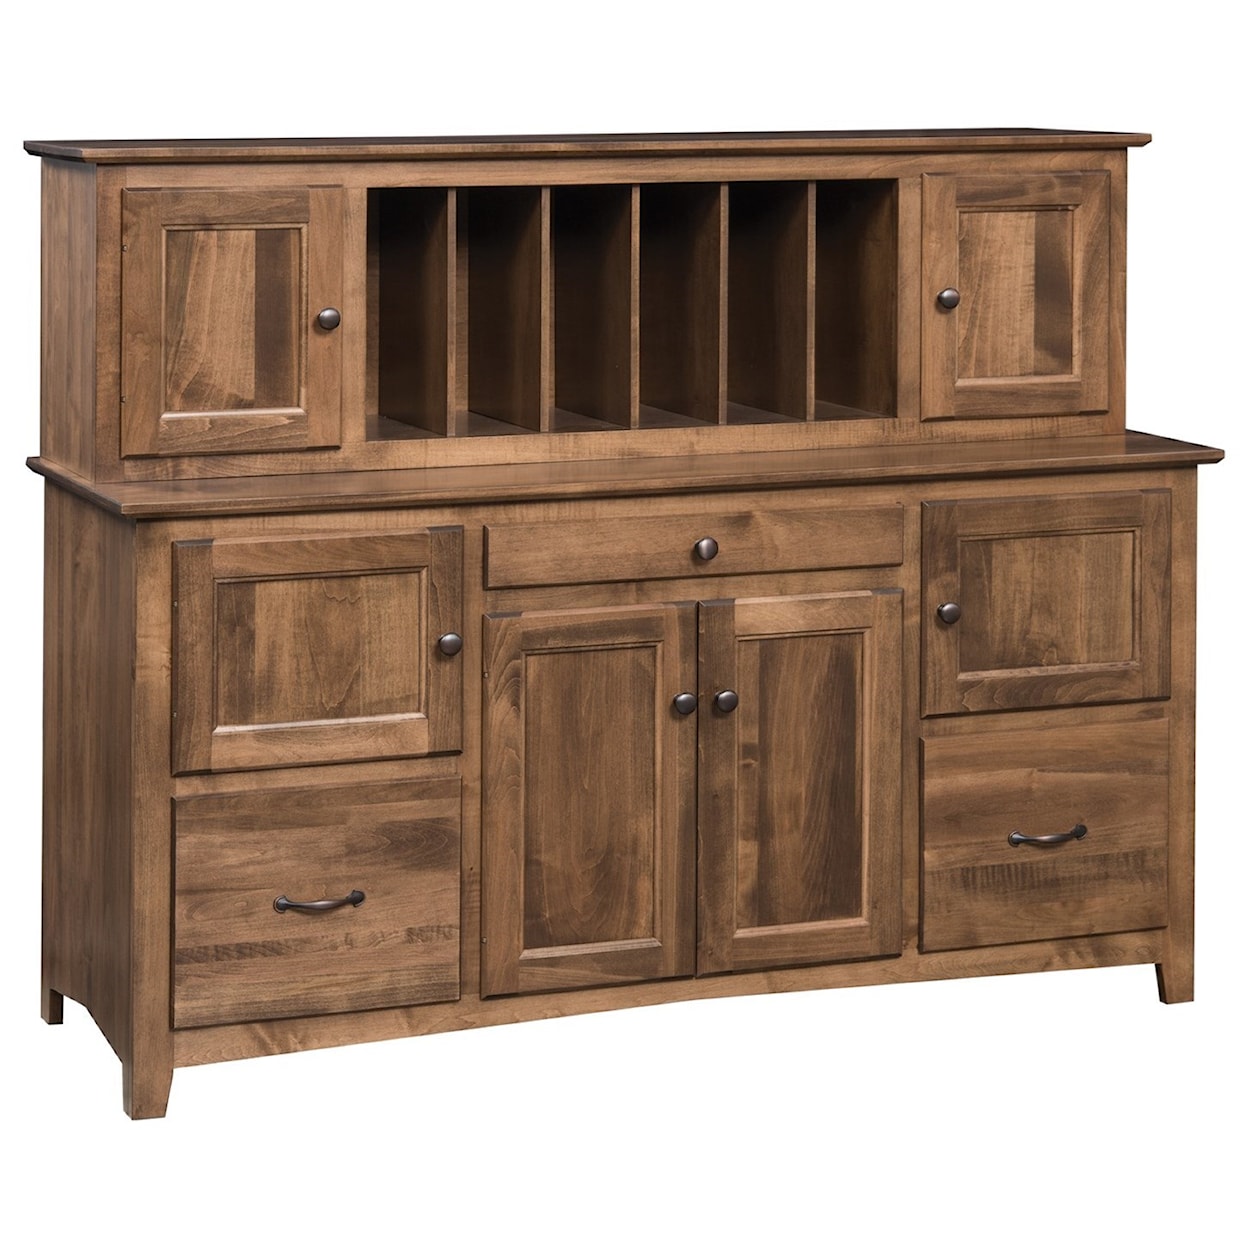 Maple Hill Woodworking Linwood 60" Computer Credenza